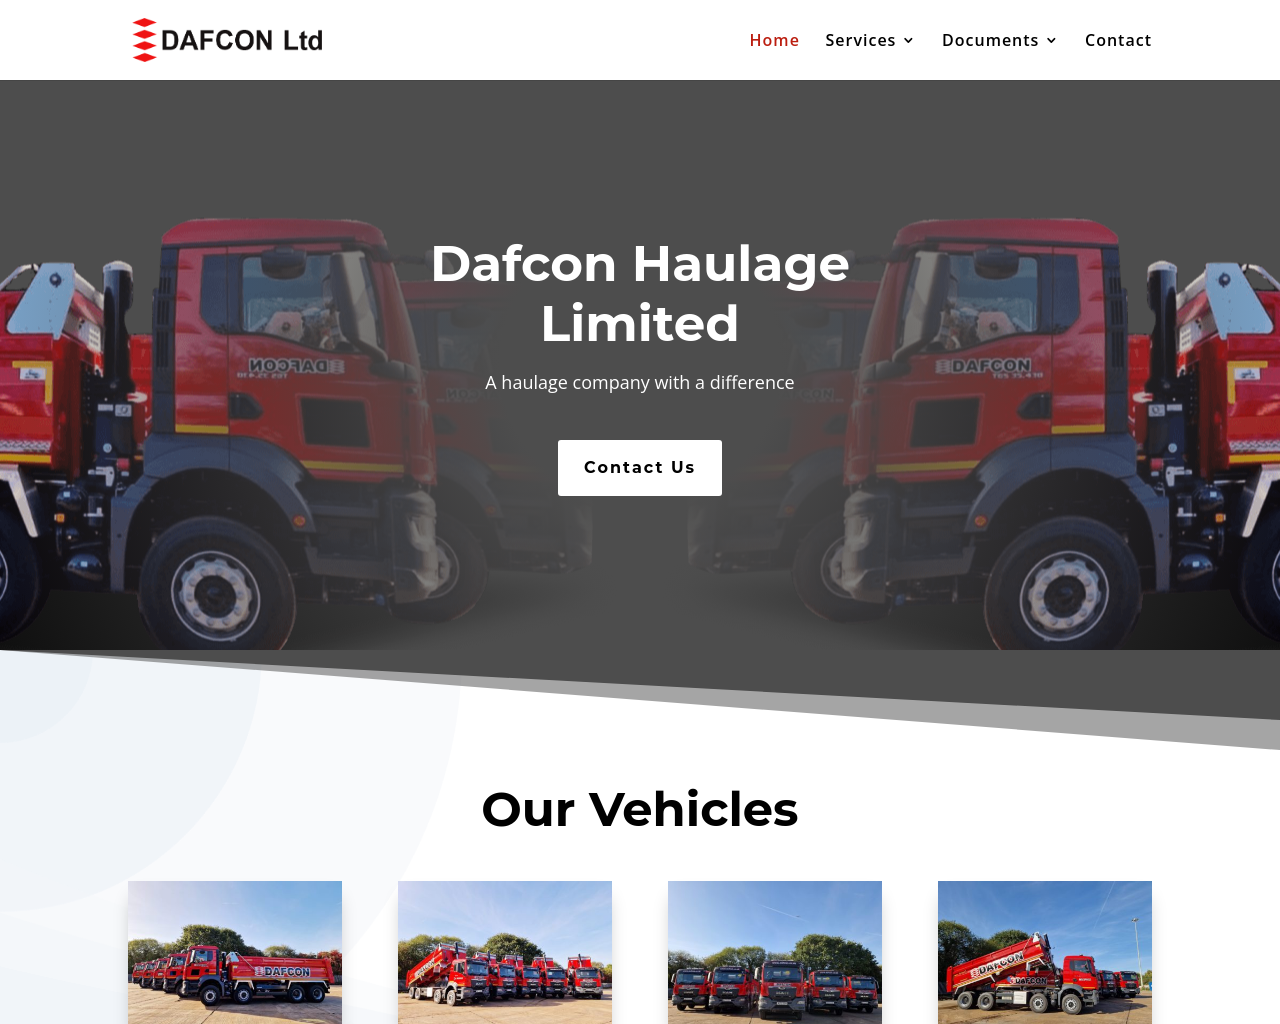 dafcon.co.uk